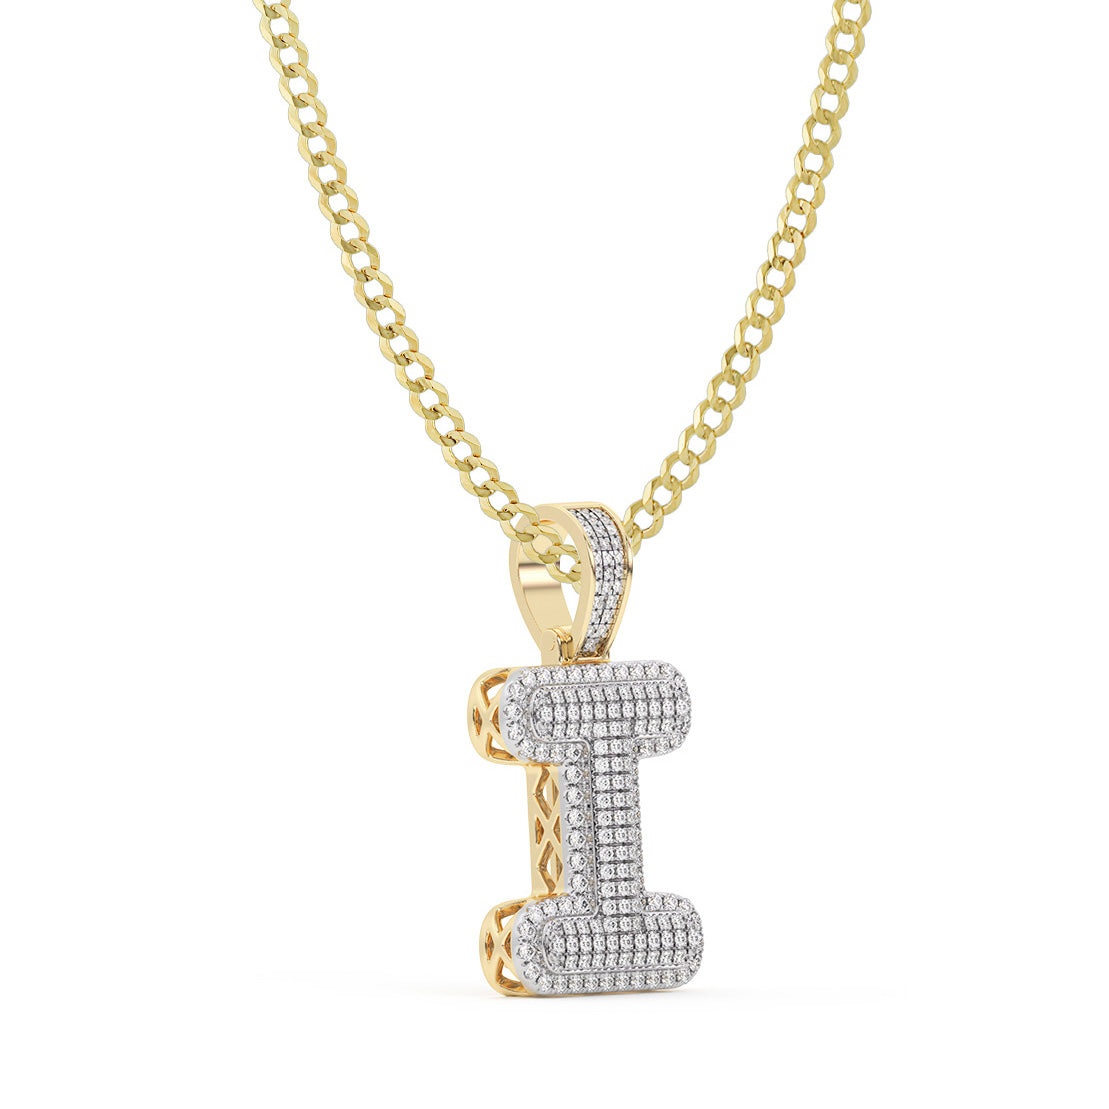 Women's Diamond "I" Initial Letter Necklace 0.37ct Solid 10K Yellow Gold